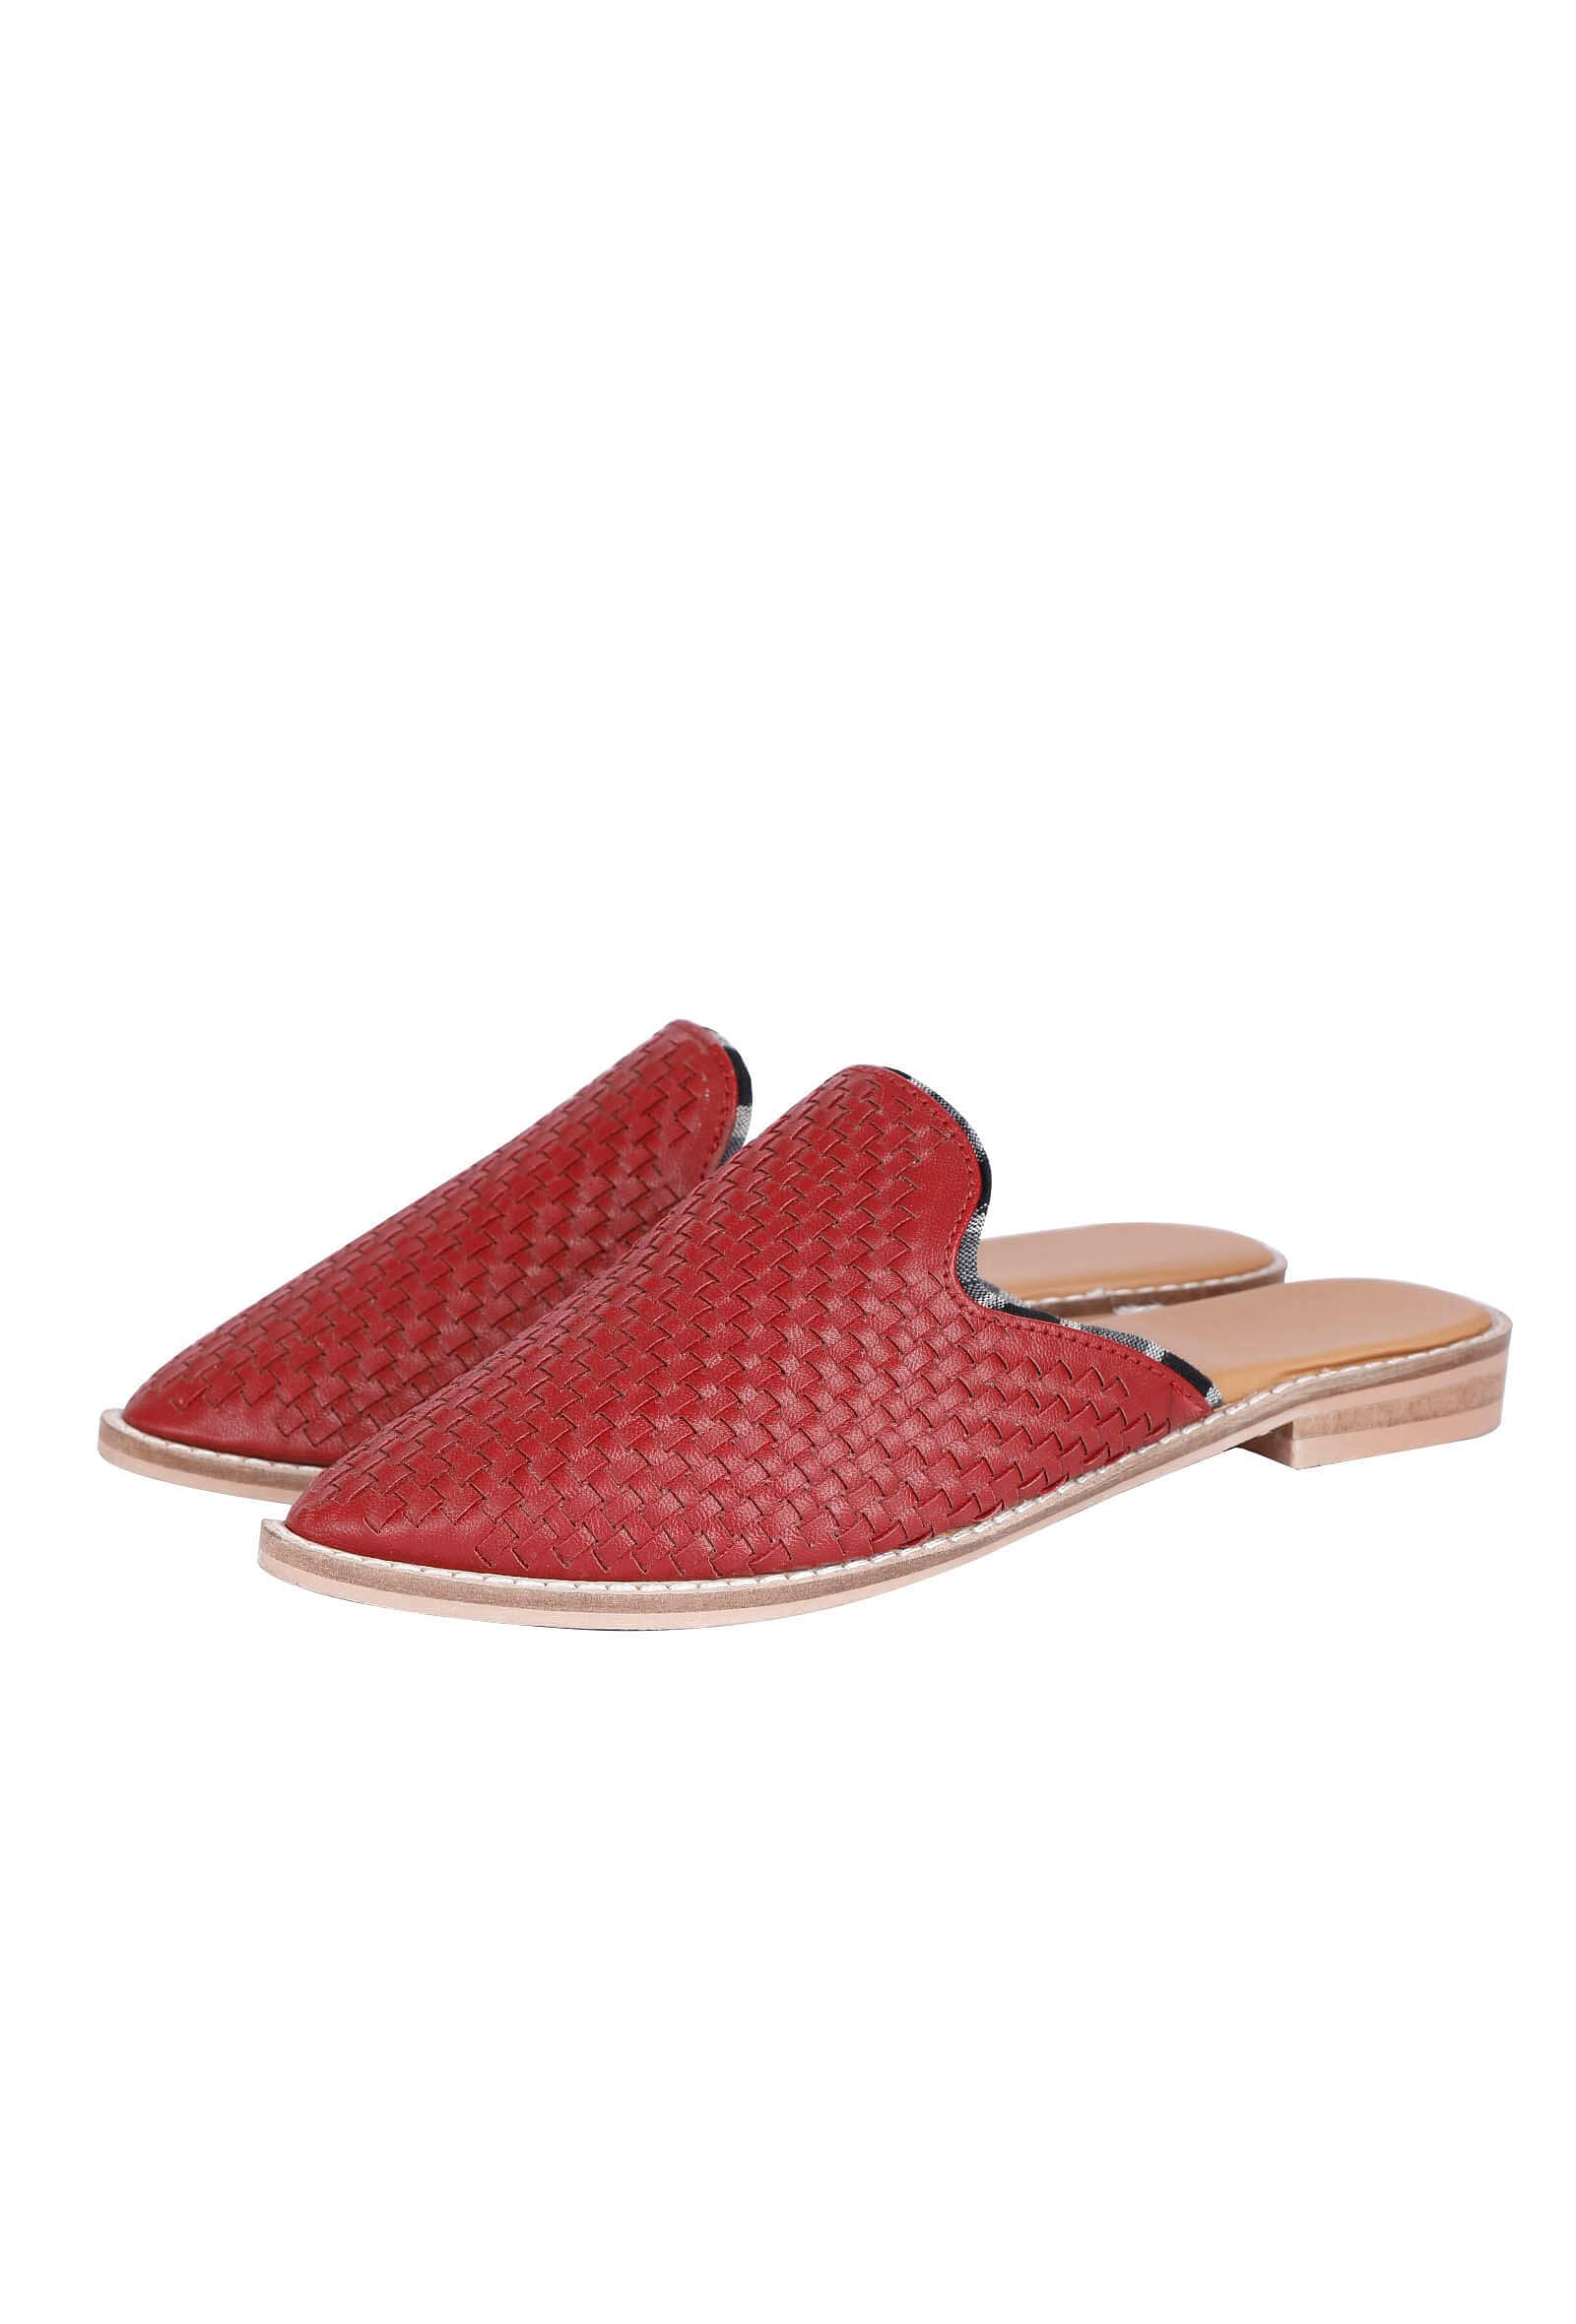 Red Handwoven Cruelty-Free Leather Slip-Ons